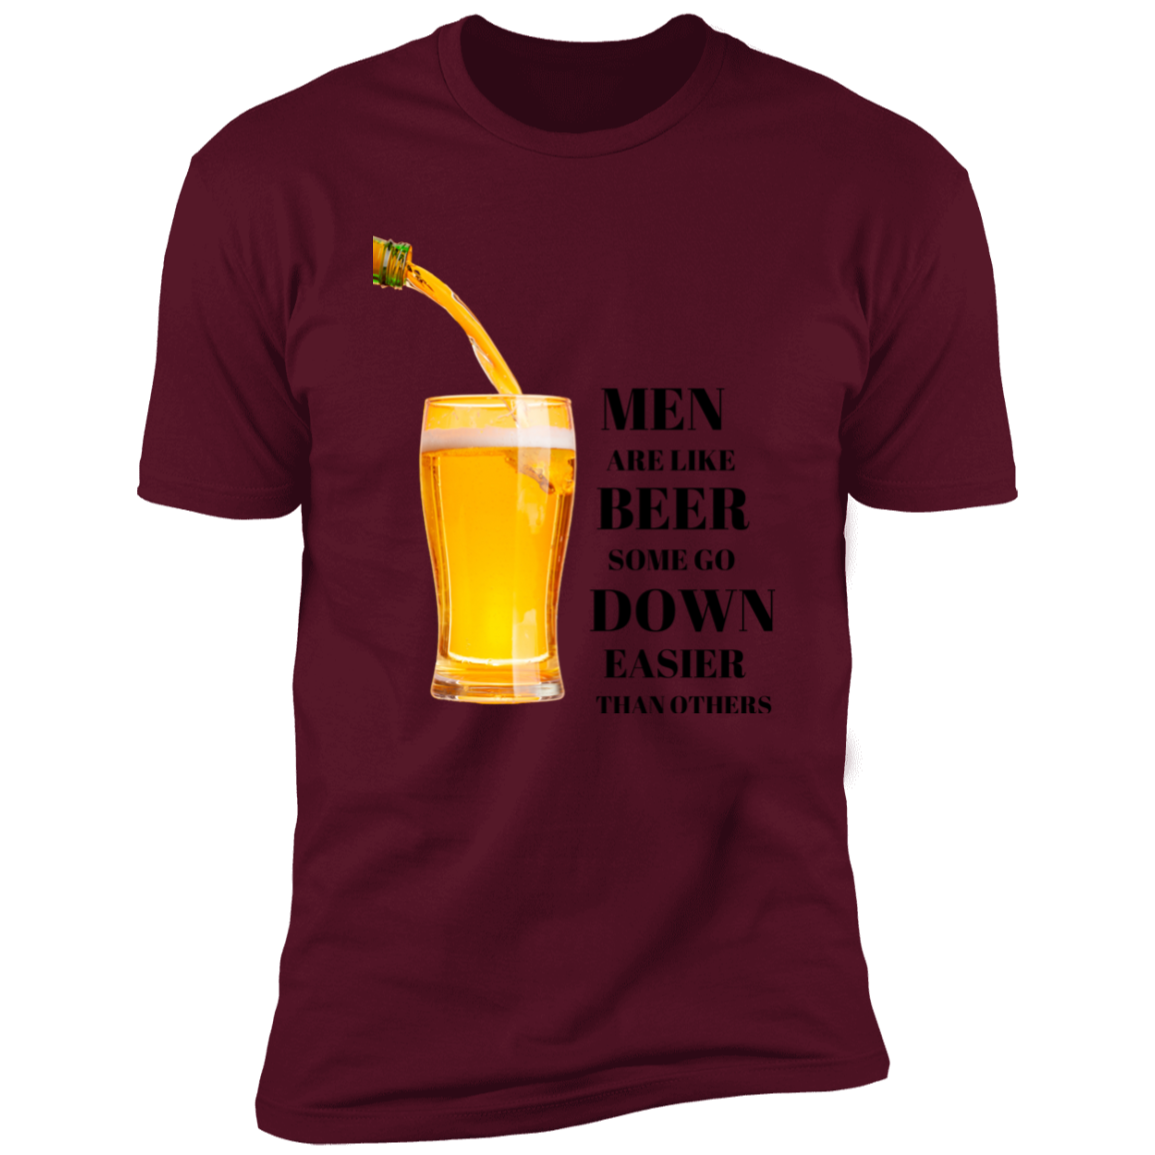 MEN ARE LIKE BEER FUNNY T-SHIRT